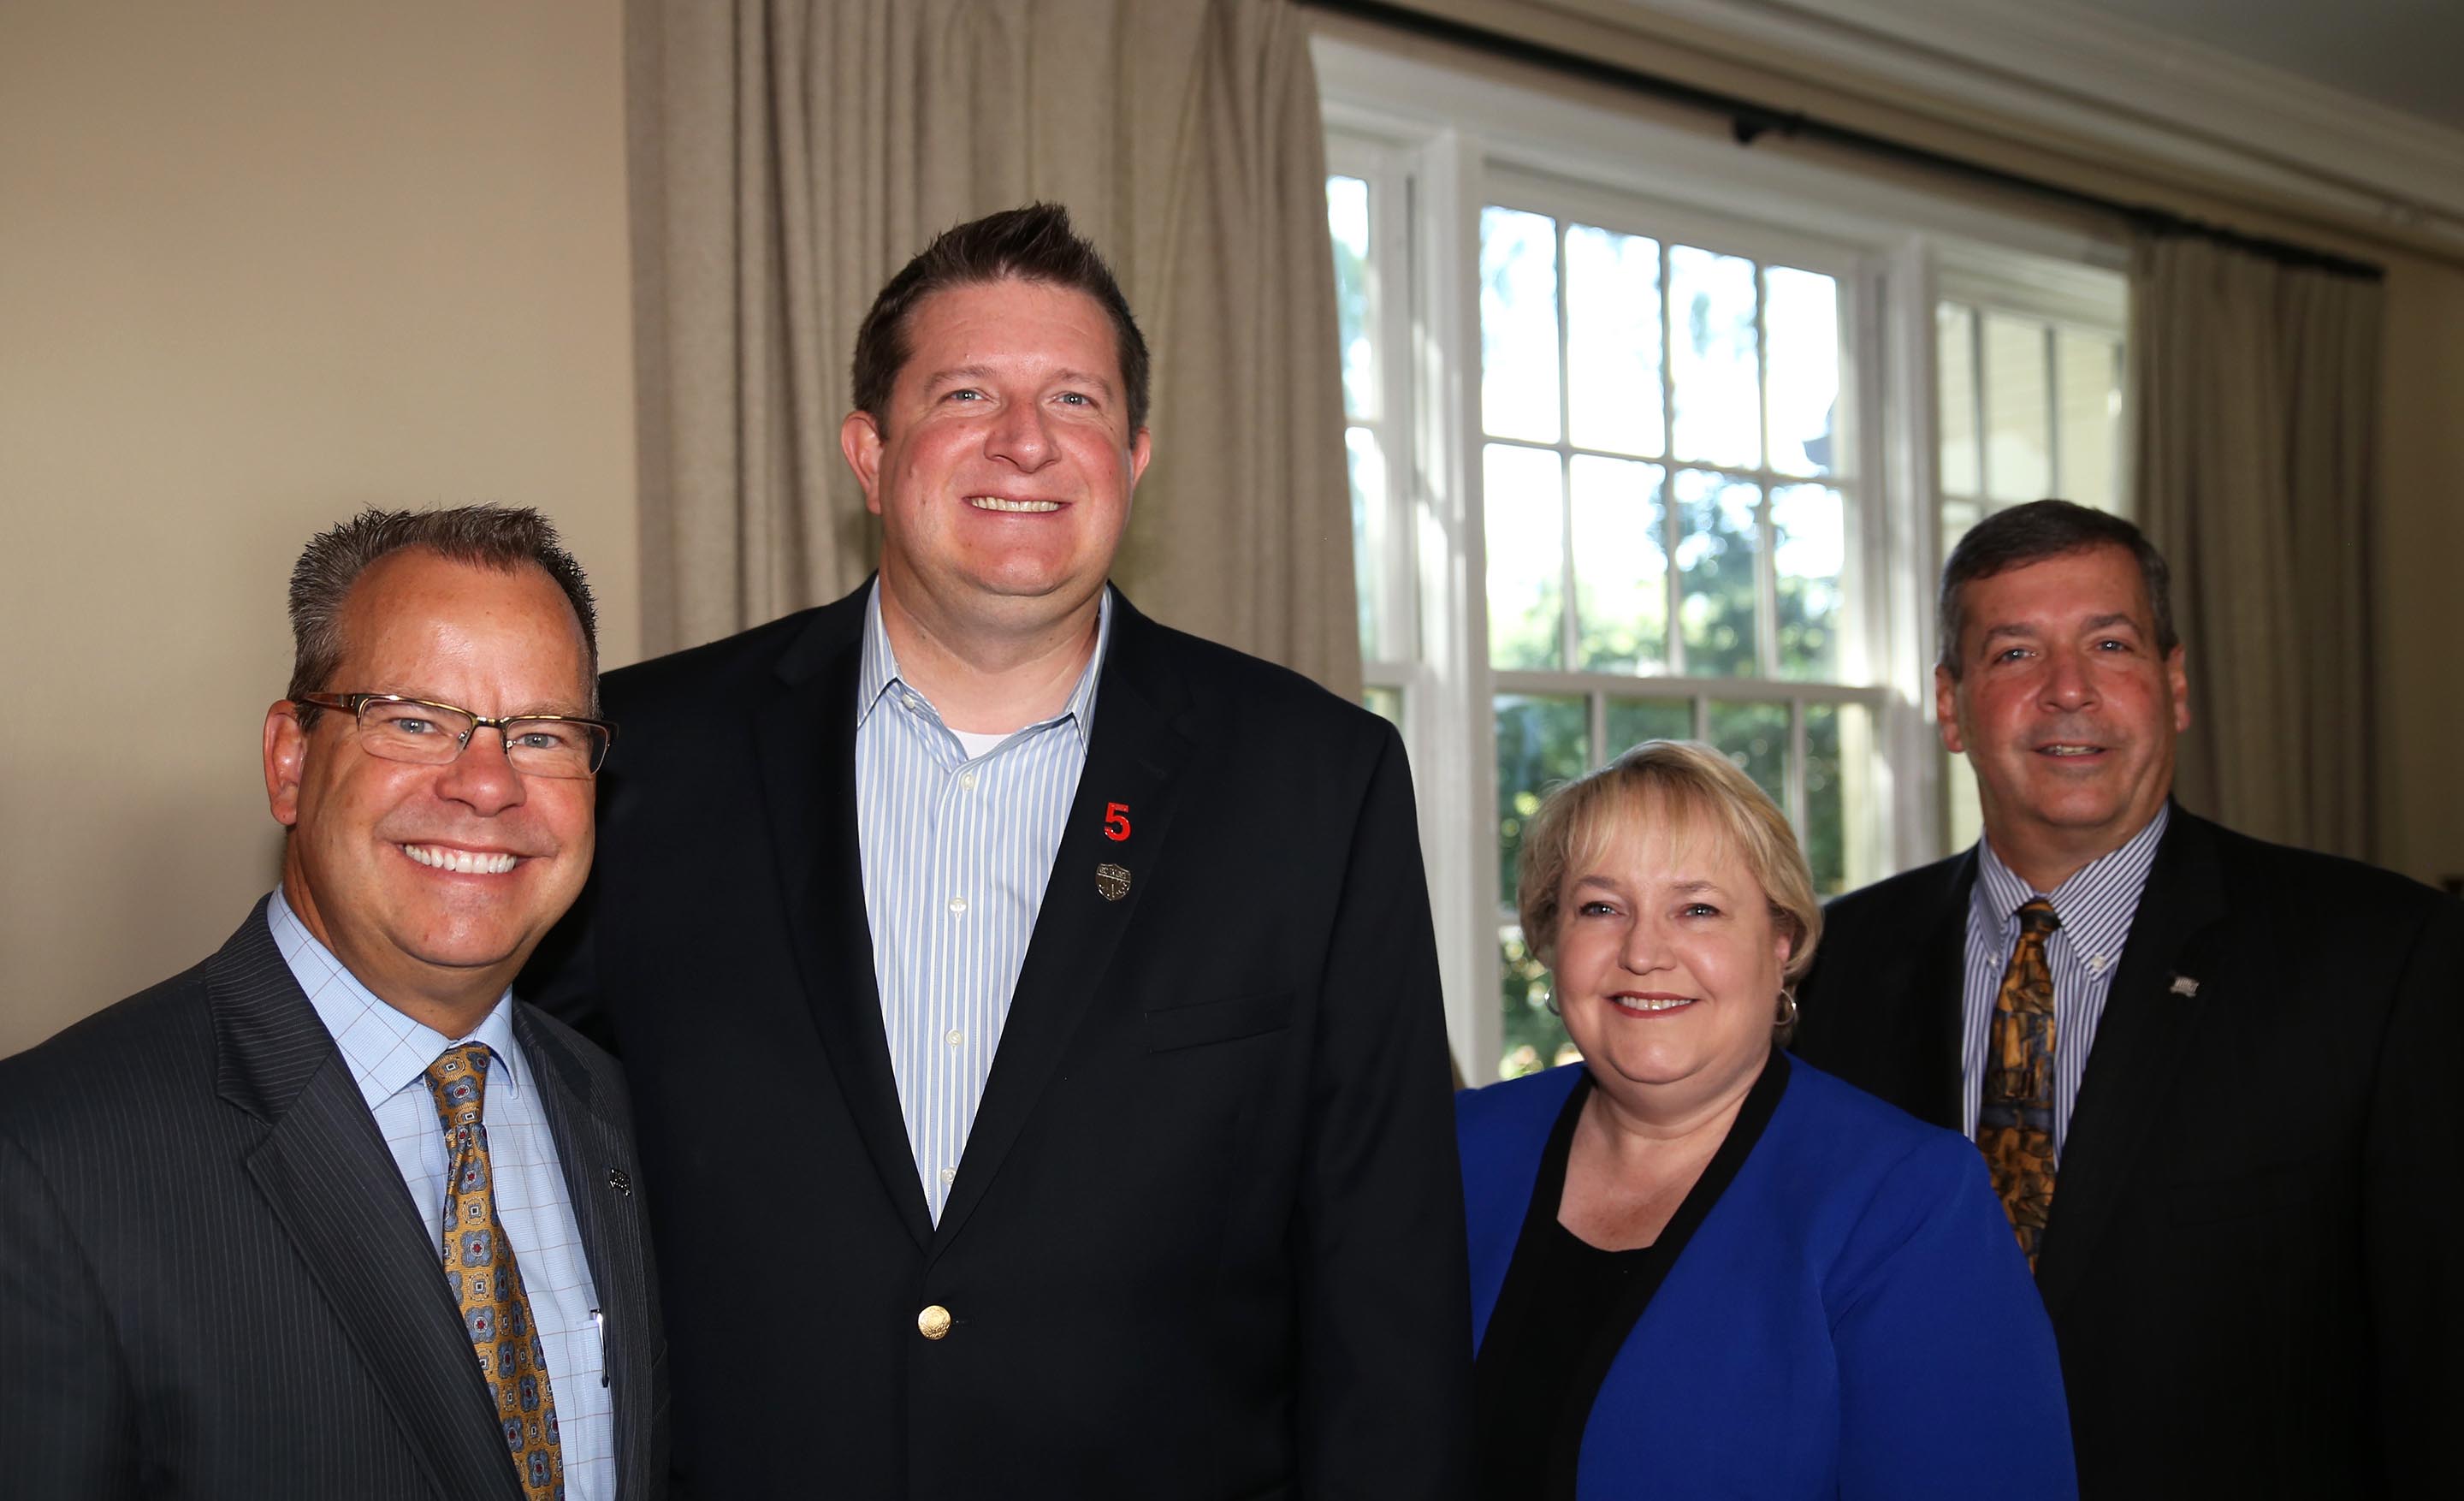 From left, UWG President Dr. Kyle Marrero, Cane Bay Partners VI Co-Founder David A. Johnson, UWG Richards College of Business Dean Dr. Faye McIntyre, UWG Vice President of University Advancement Dave